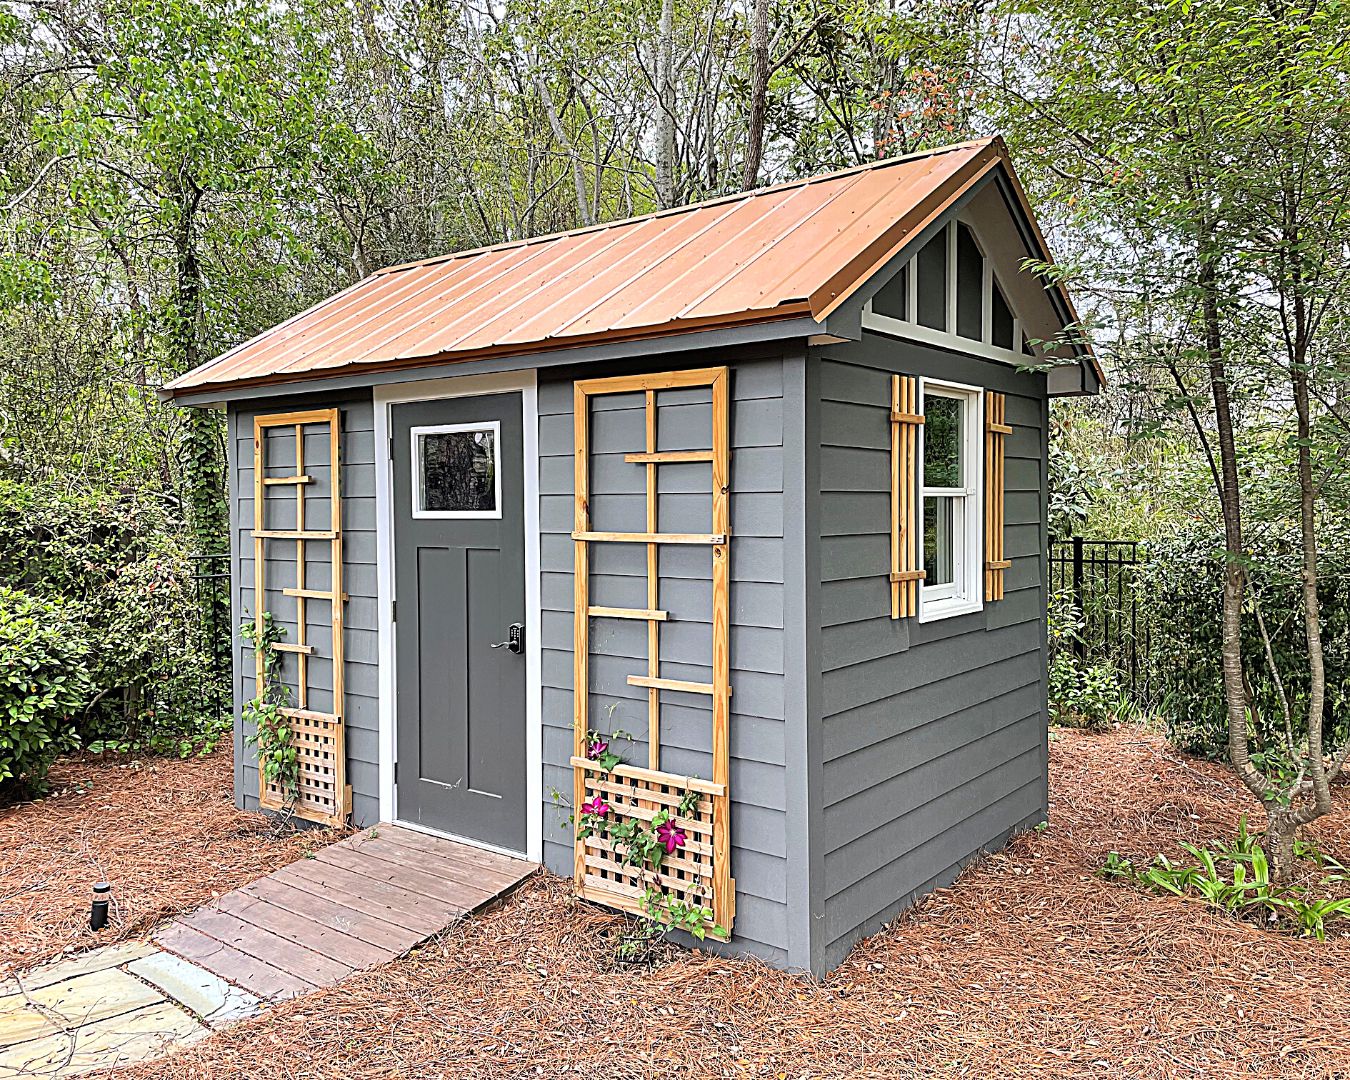 Garden Shed built using Summerwood.com Palmerston model plans as a guide